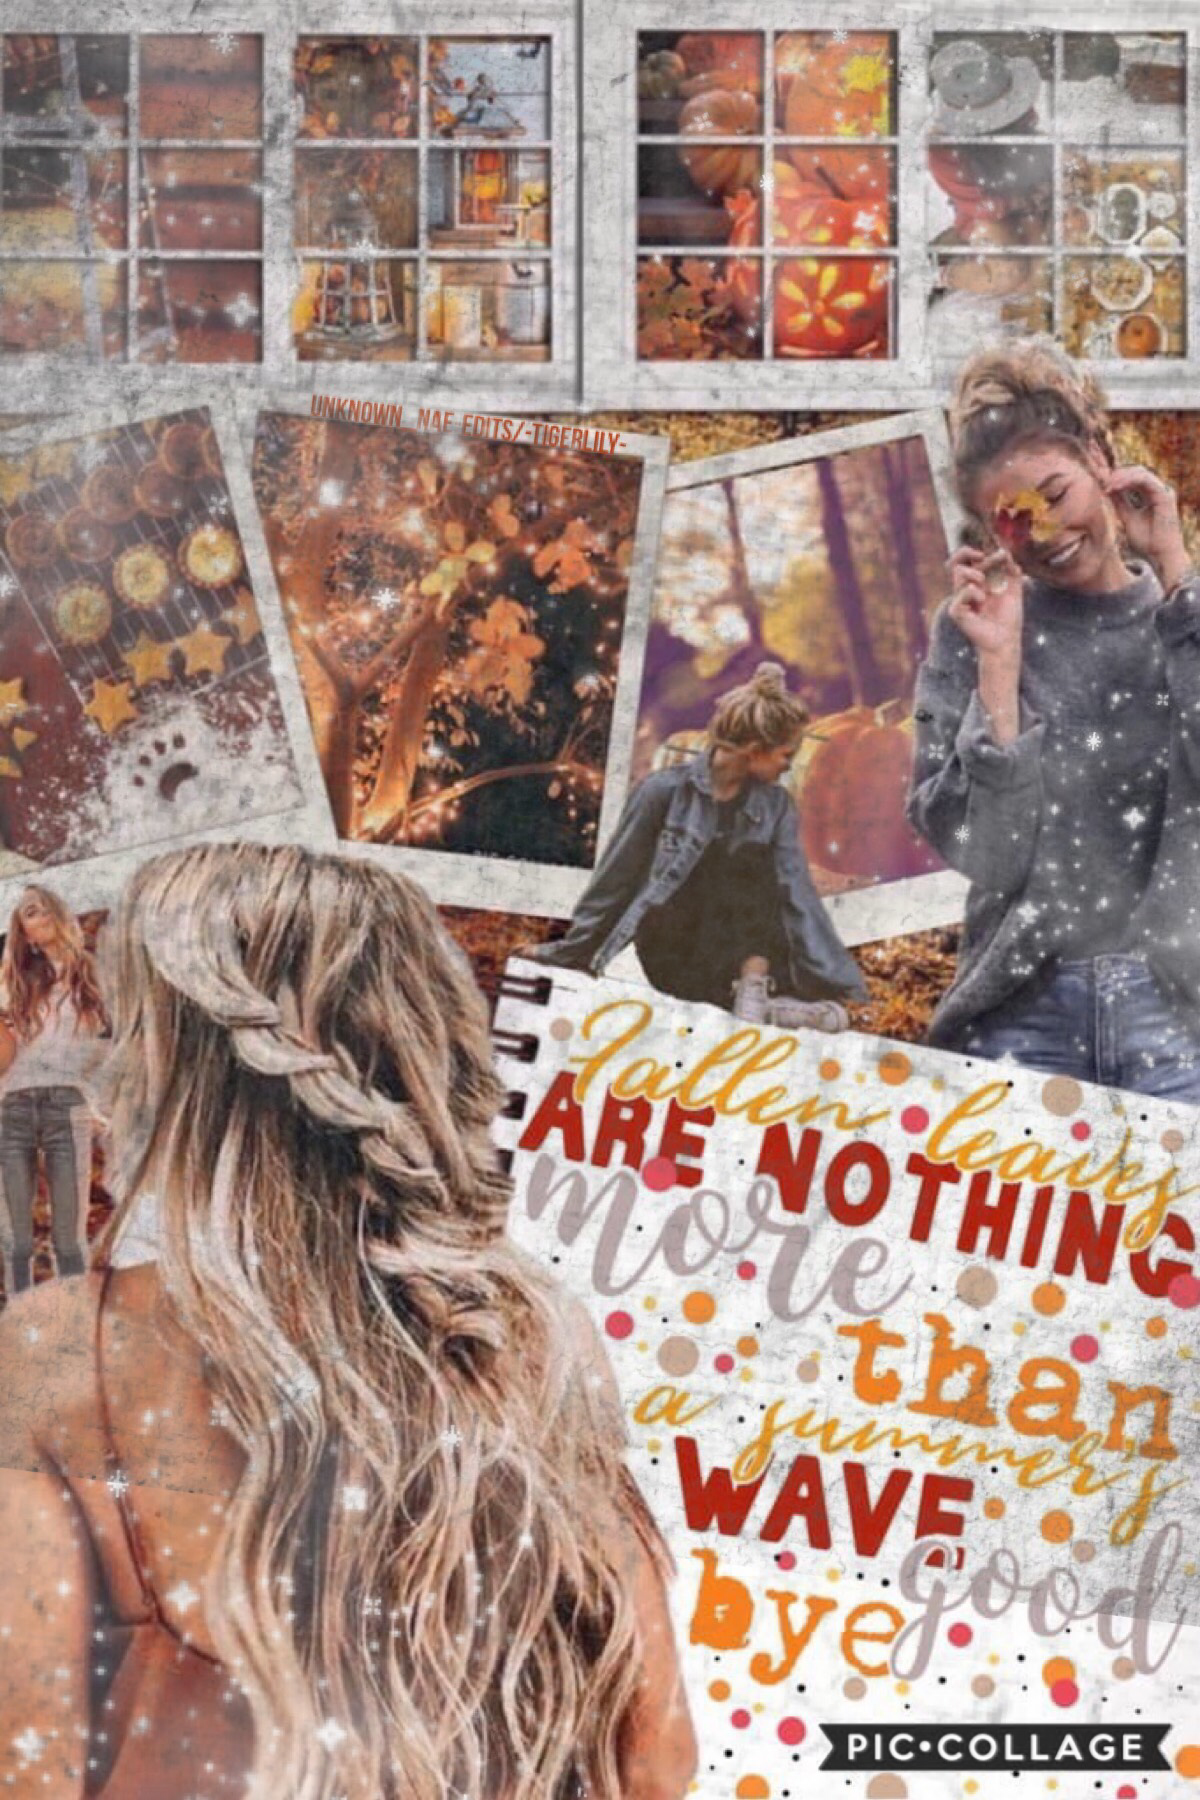 Collab with the incredible...
Unknown_Nae-Edits! Go check her account out! She is an amazing collager! I did the background and pngs and she did the amazing text and I love how it turned out! It was so much fun to collab with her😉